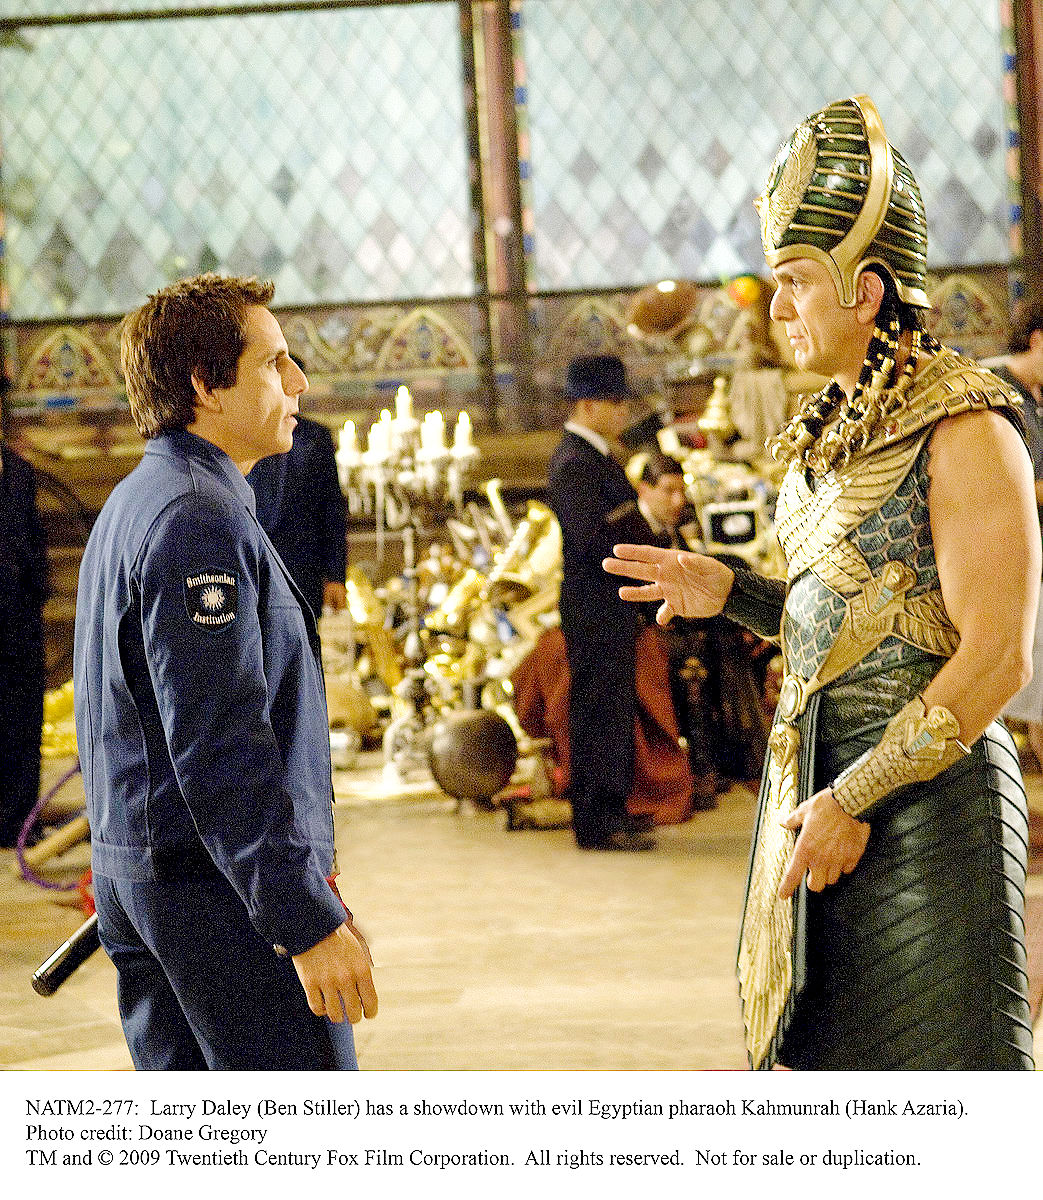 Ben Stiller stars as Larry Daley and Hank Azaria stars as Kah Mun Rah in 20th Century Fox's Night at the Museum 2: Battle of the Smithsonian (2009). Photo credit by Doane Gregory.